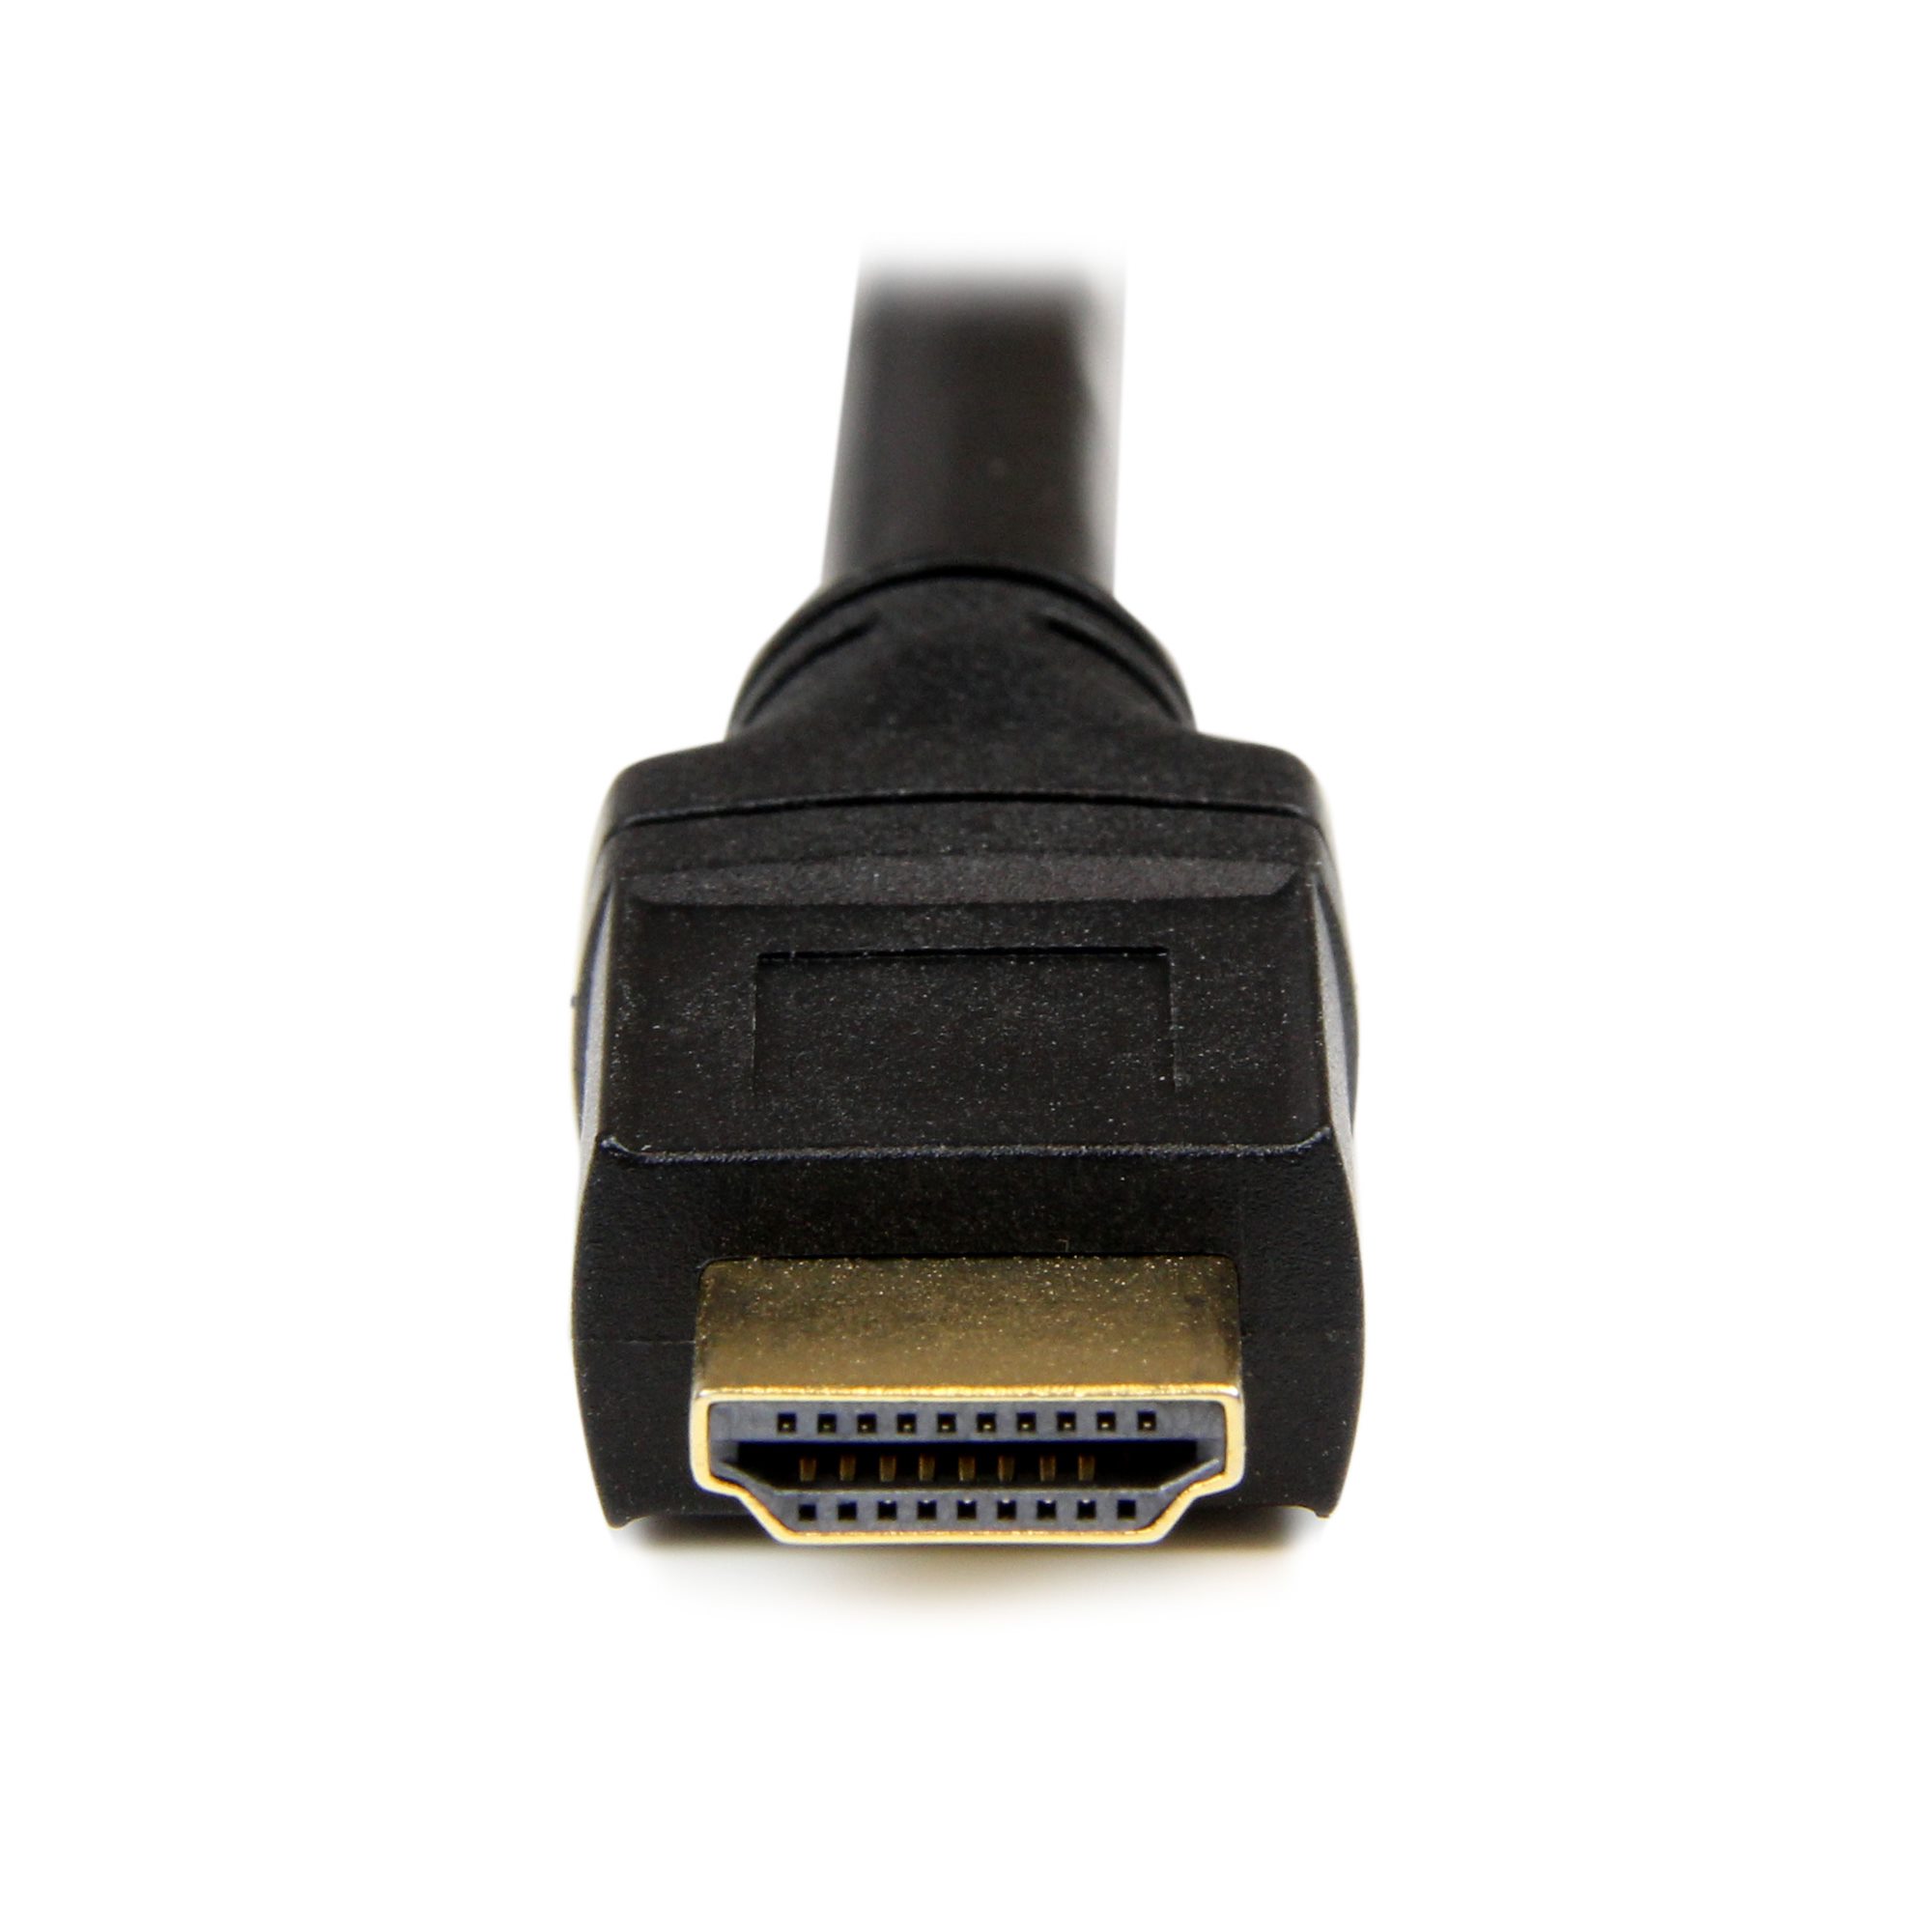 25ft Plenum HDMI Cable w/ Ethernet 4K - HDMI® Cables & HDMI Adapters